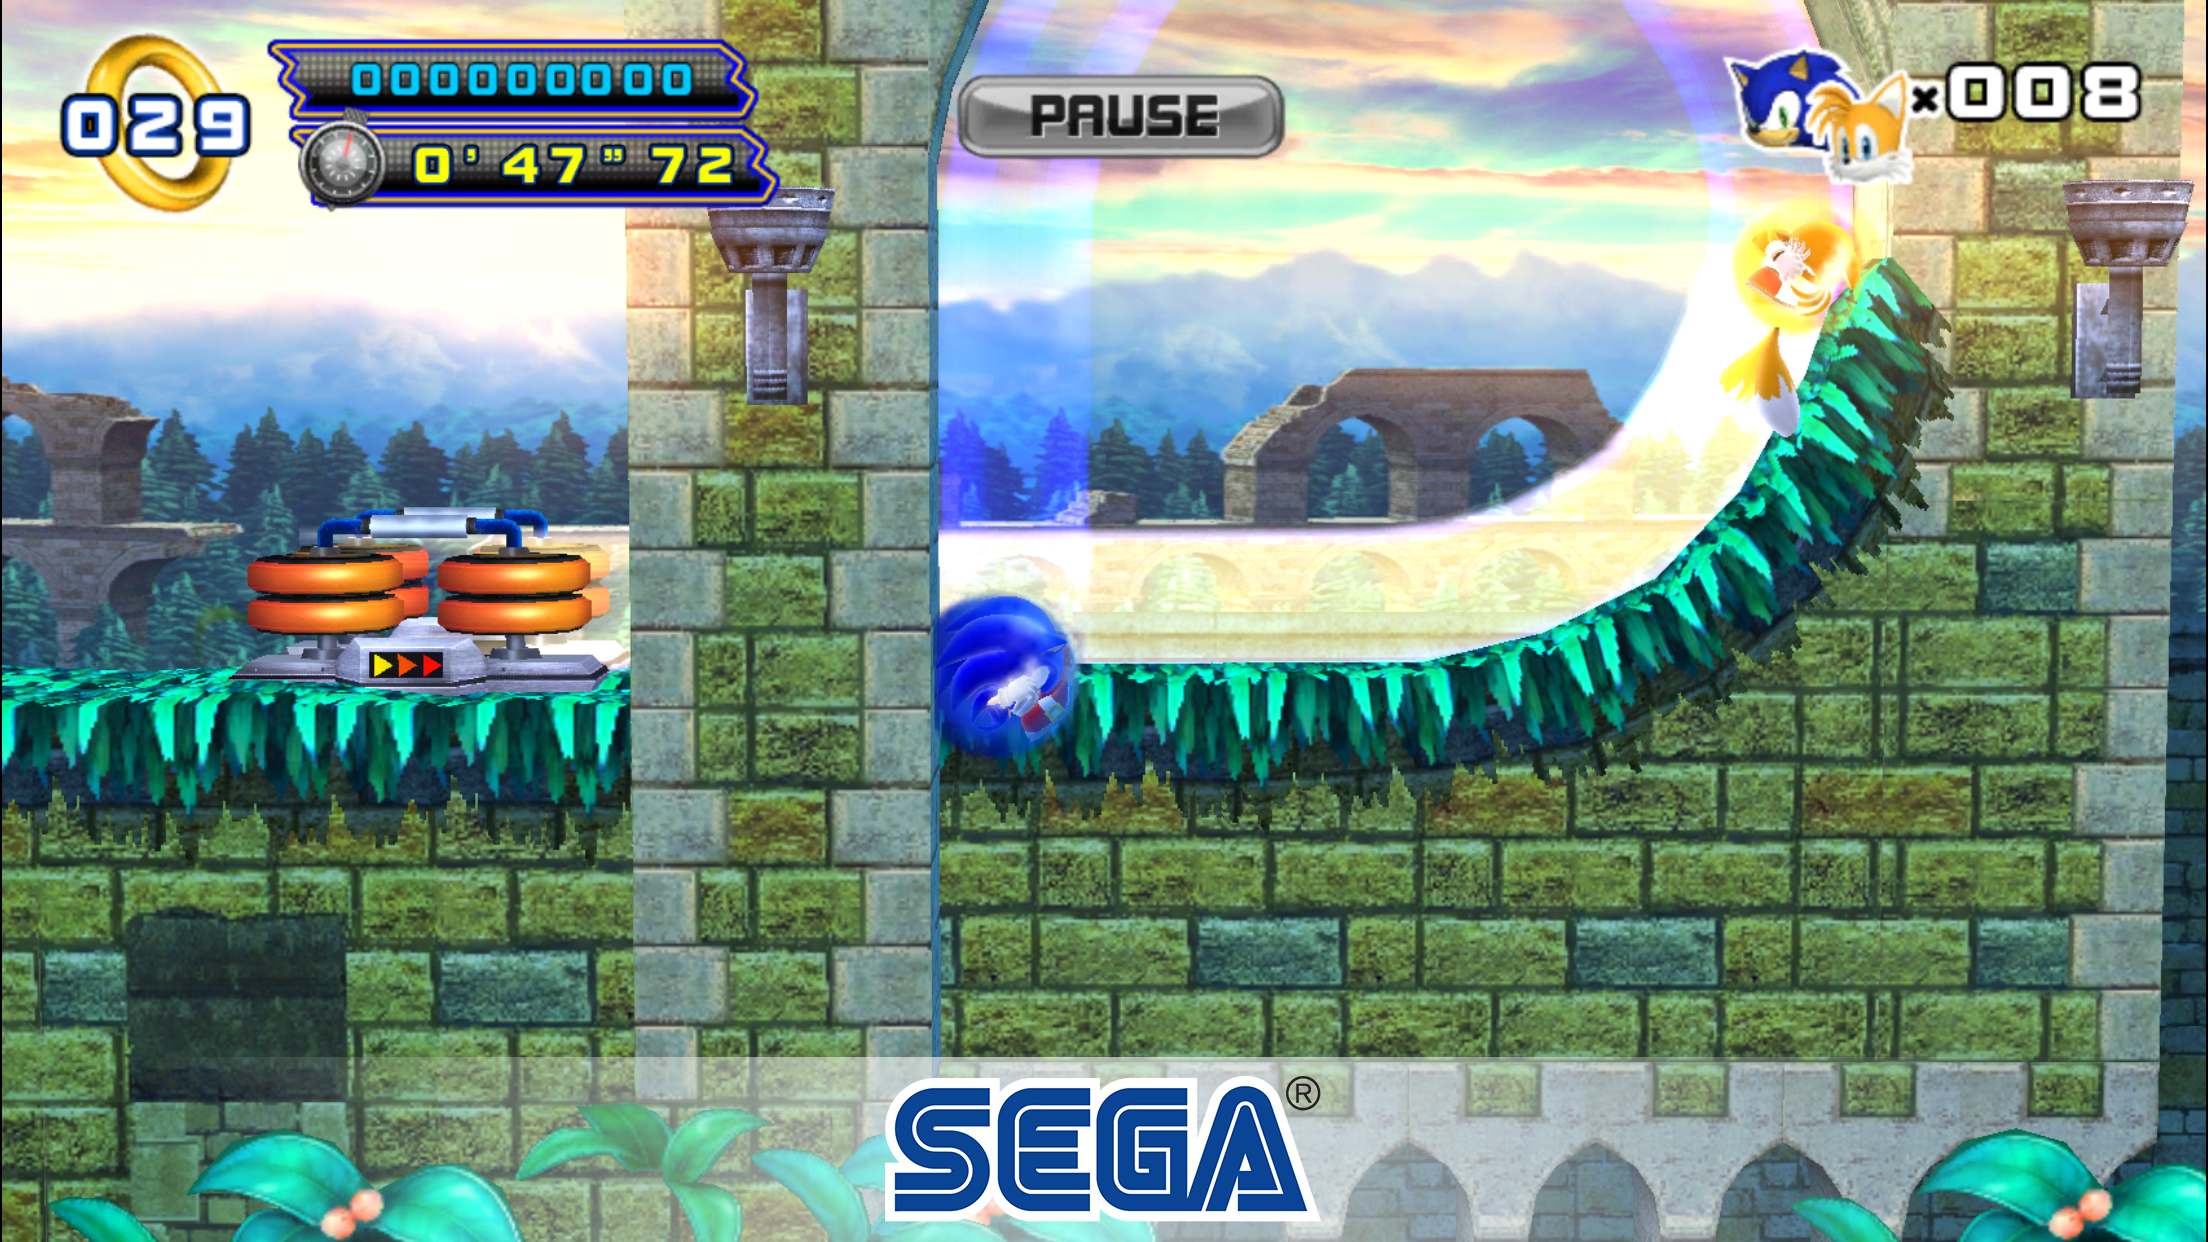 Sonic The Hedgehog 4 Ep. II android iOS apk download for free-TapTap